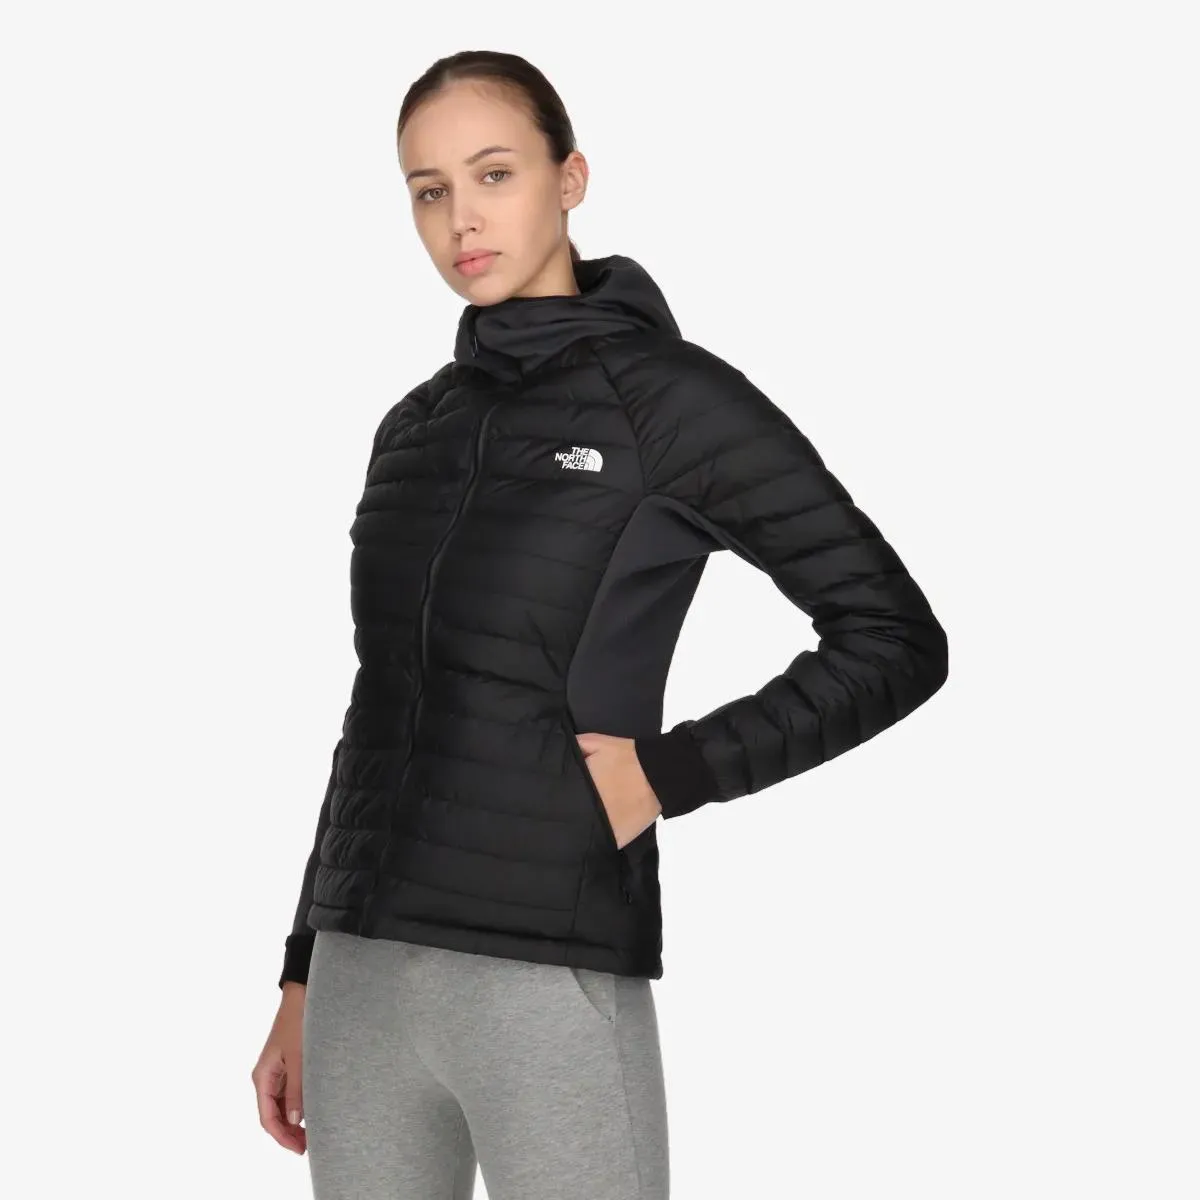 THE NORTH FACE Women’s Insulation Hybrid 